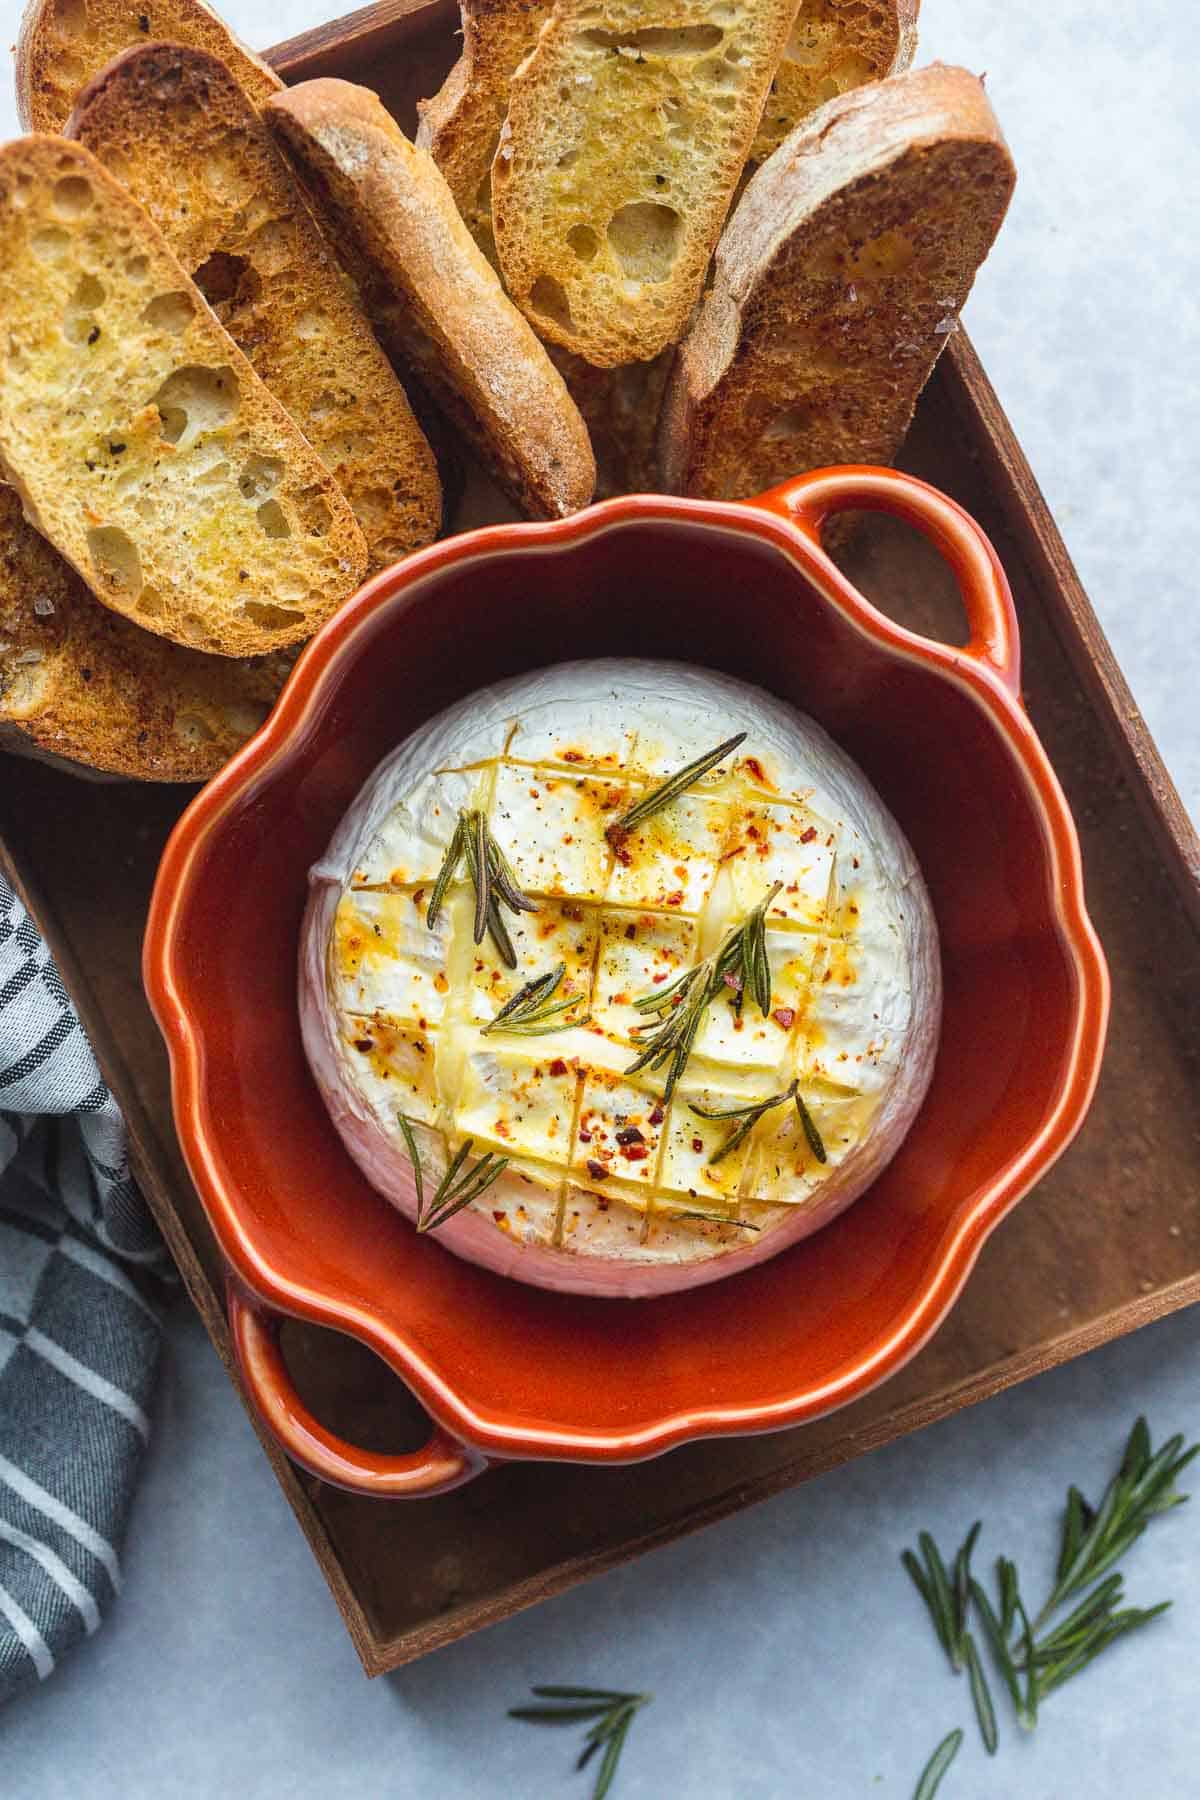 Baked Camembert served with toasted ciabatta bread.